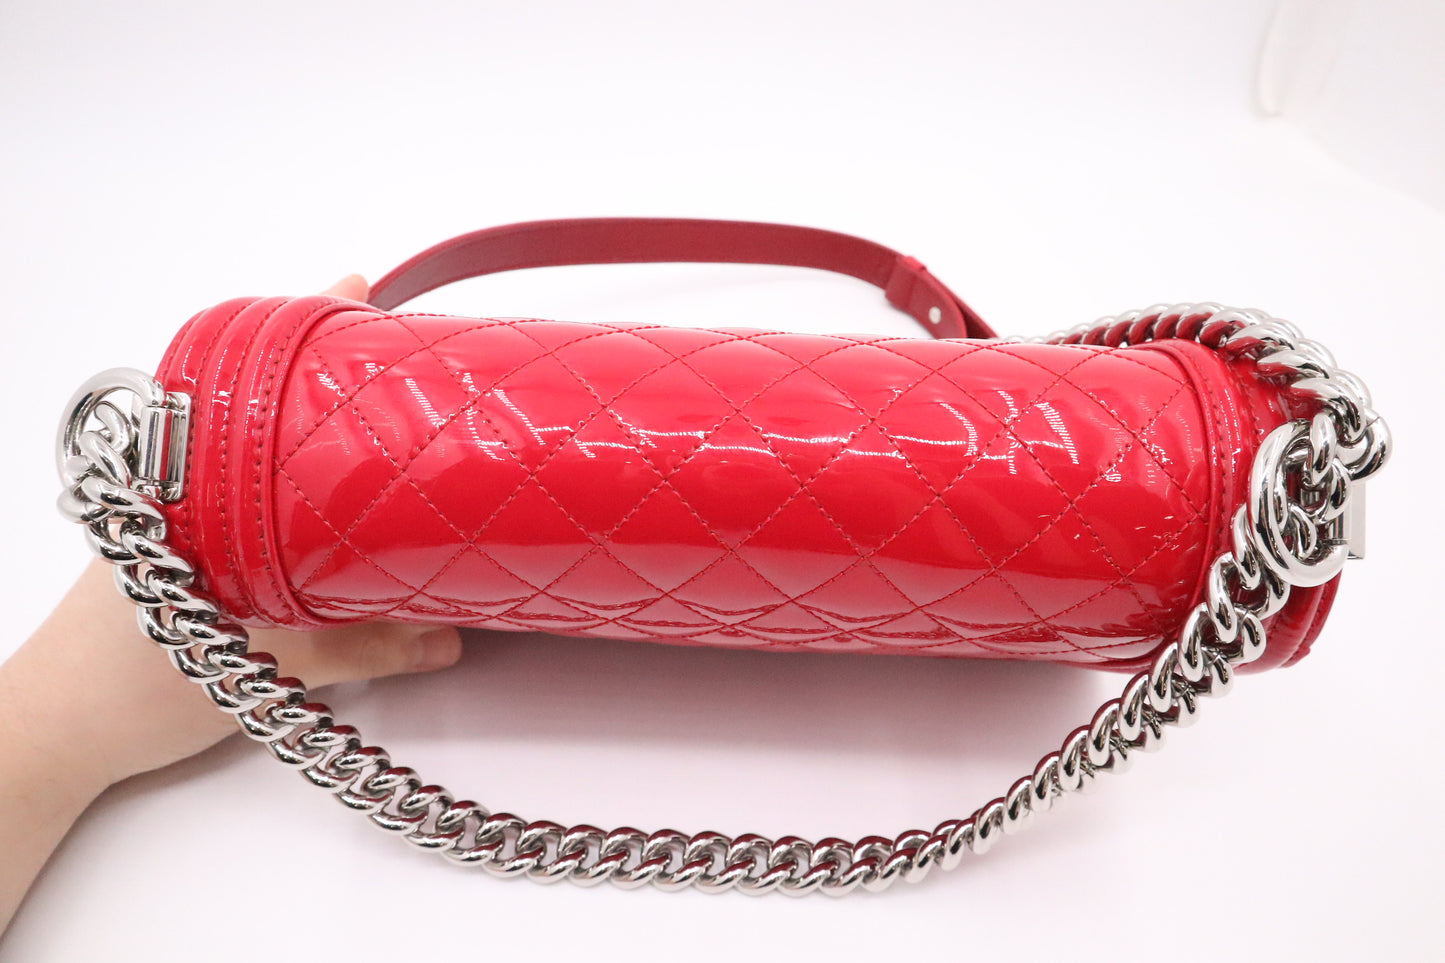 Chanel Medium Boy in Pink Patent Leather